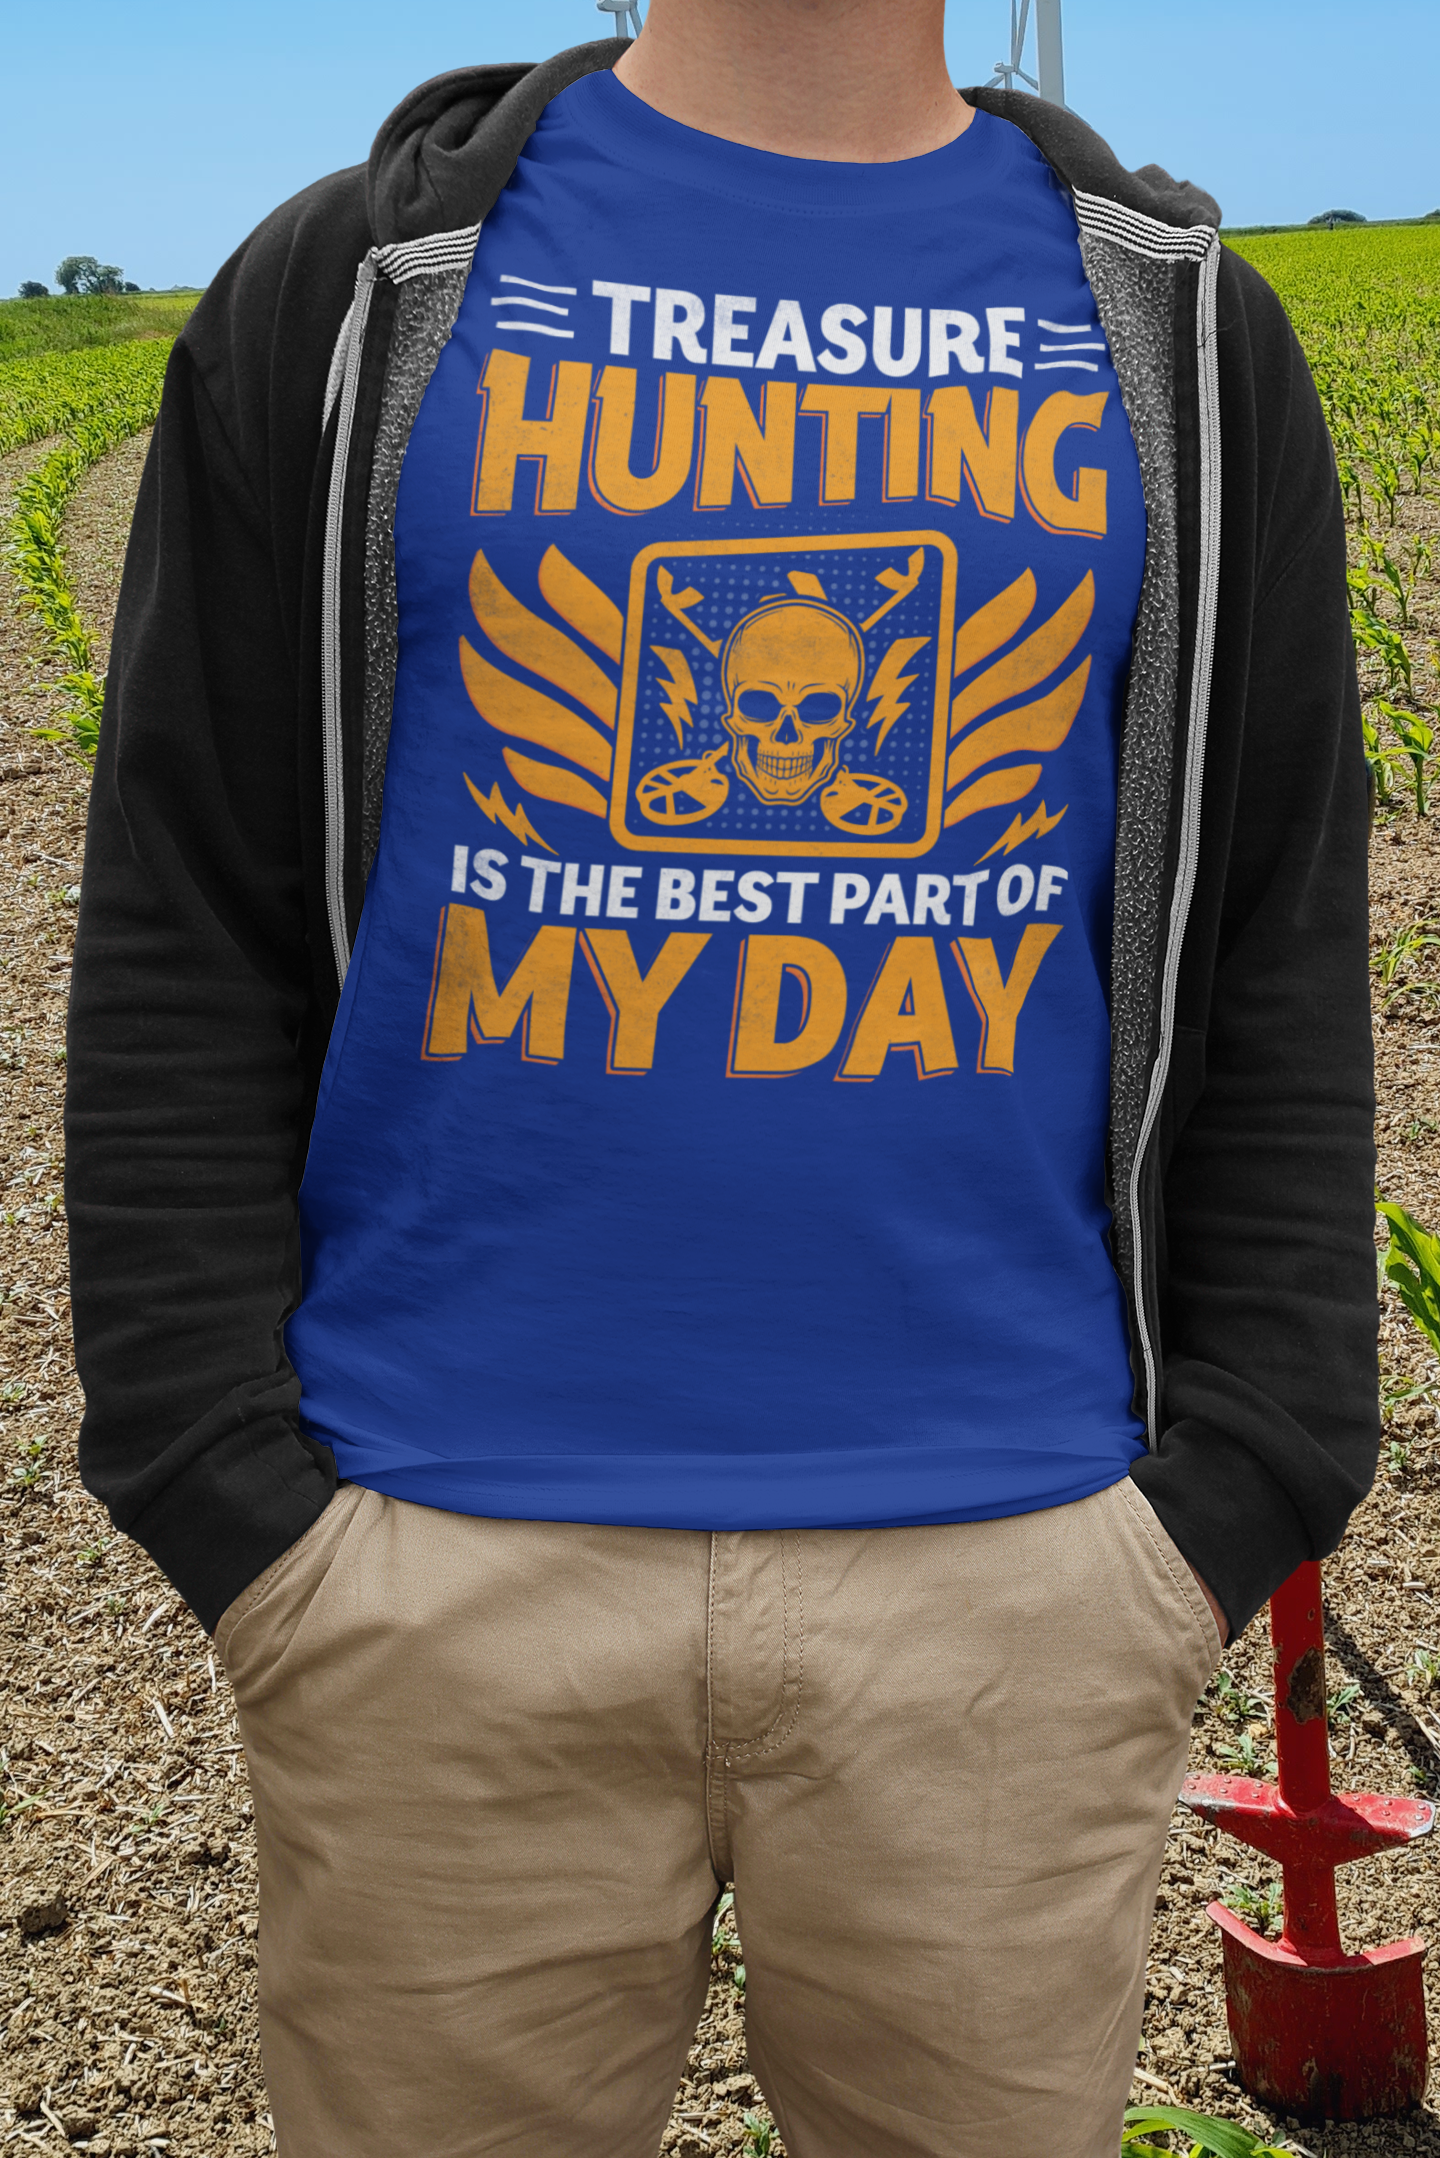 Treasure Hunting is the best part of my day T-shirt